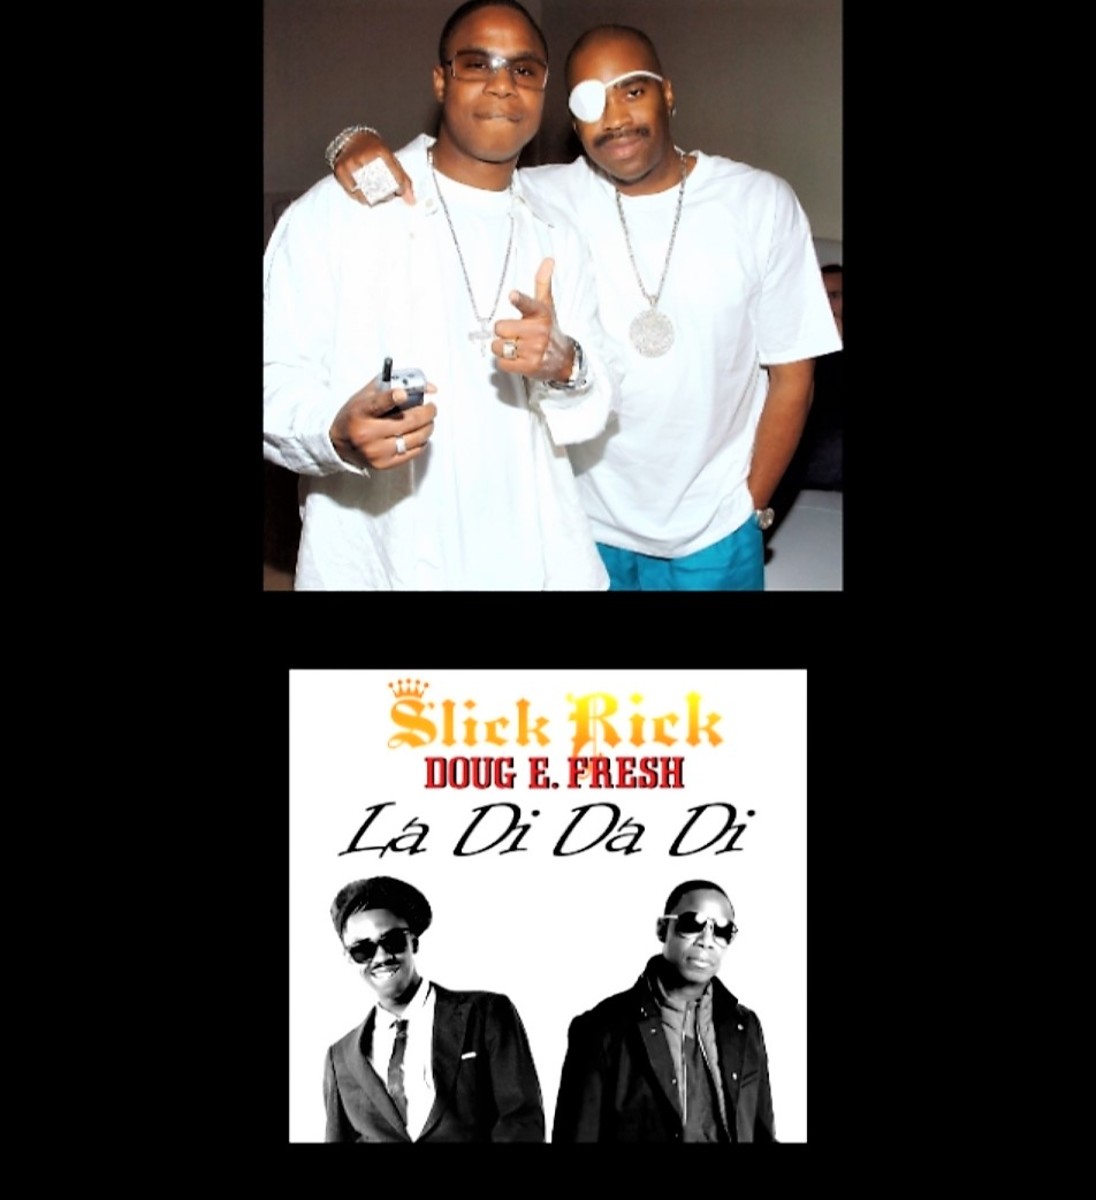 Slick Rick and Doug E. Fresh were heard often on the boomboxes every day on the street and everyone loved "La Di Da Di"